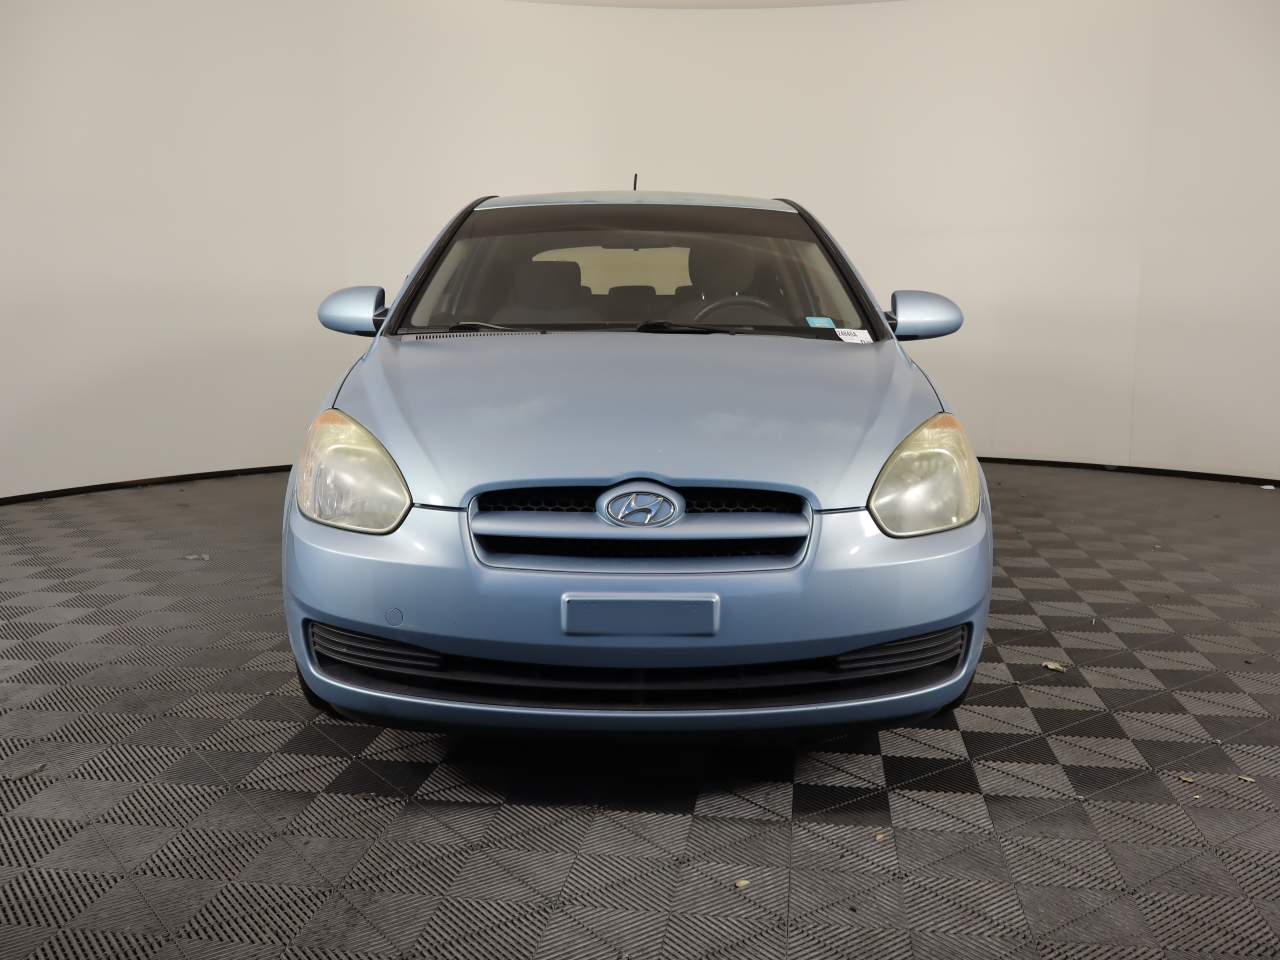 Used 2008 Hyundai Accent GS with VIN KMHCM36C58U096566 for sale in Las Vegas, NV